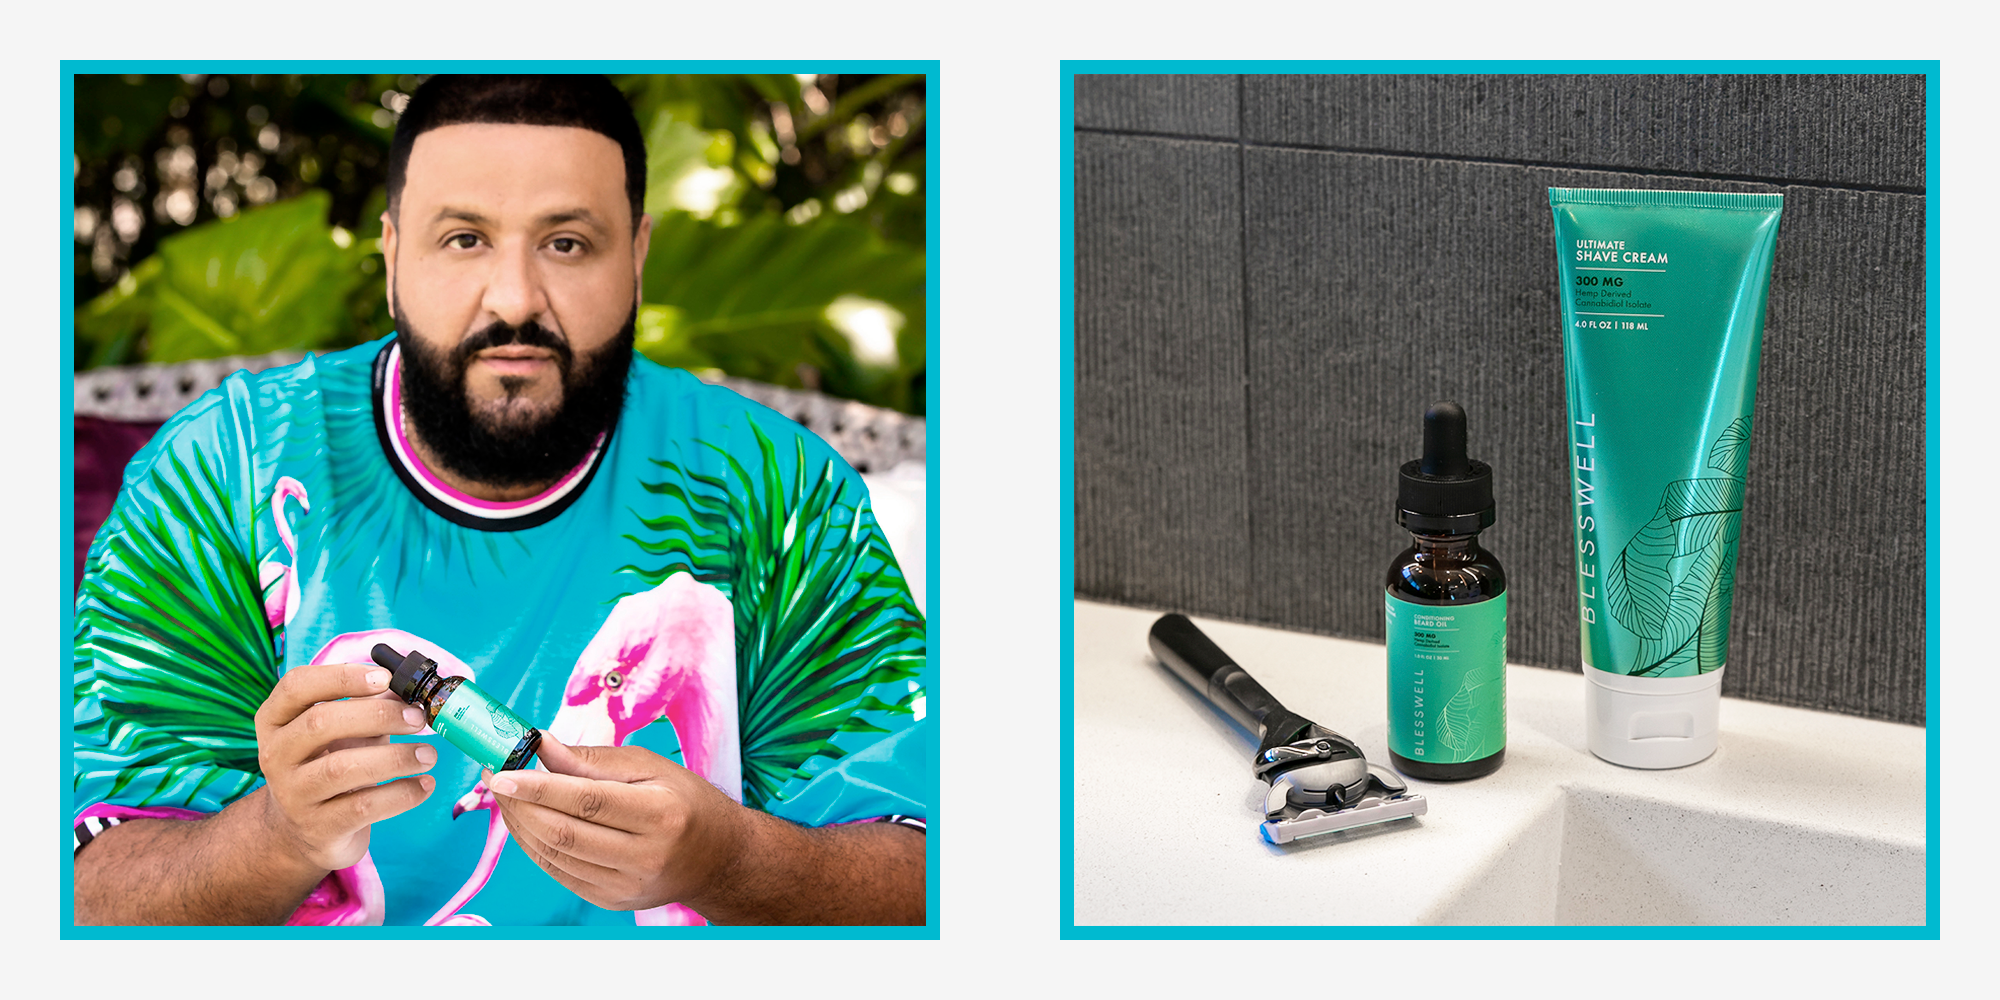 DJ Khaled Just Launched A We The Best Home Line - #WellBlessedHome  Collection